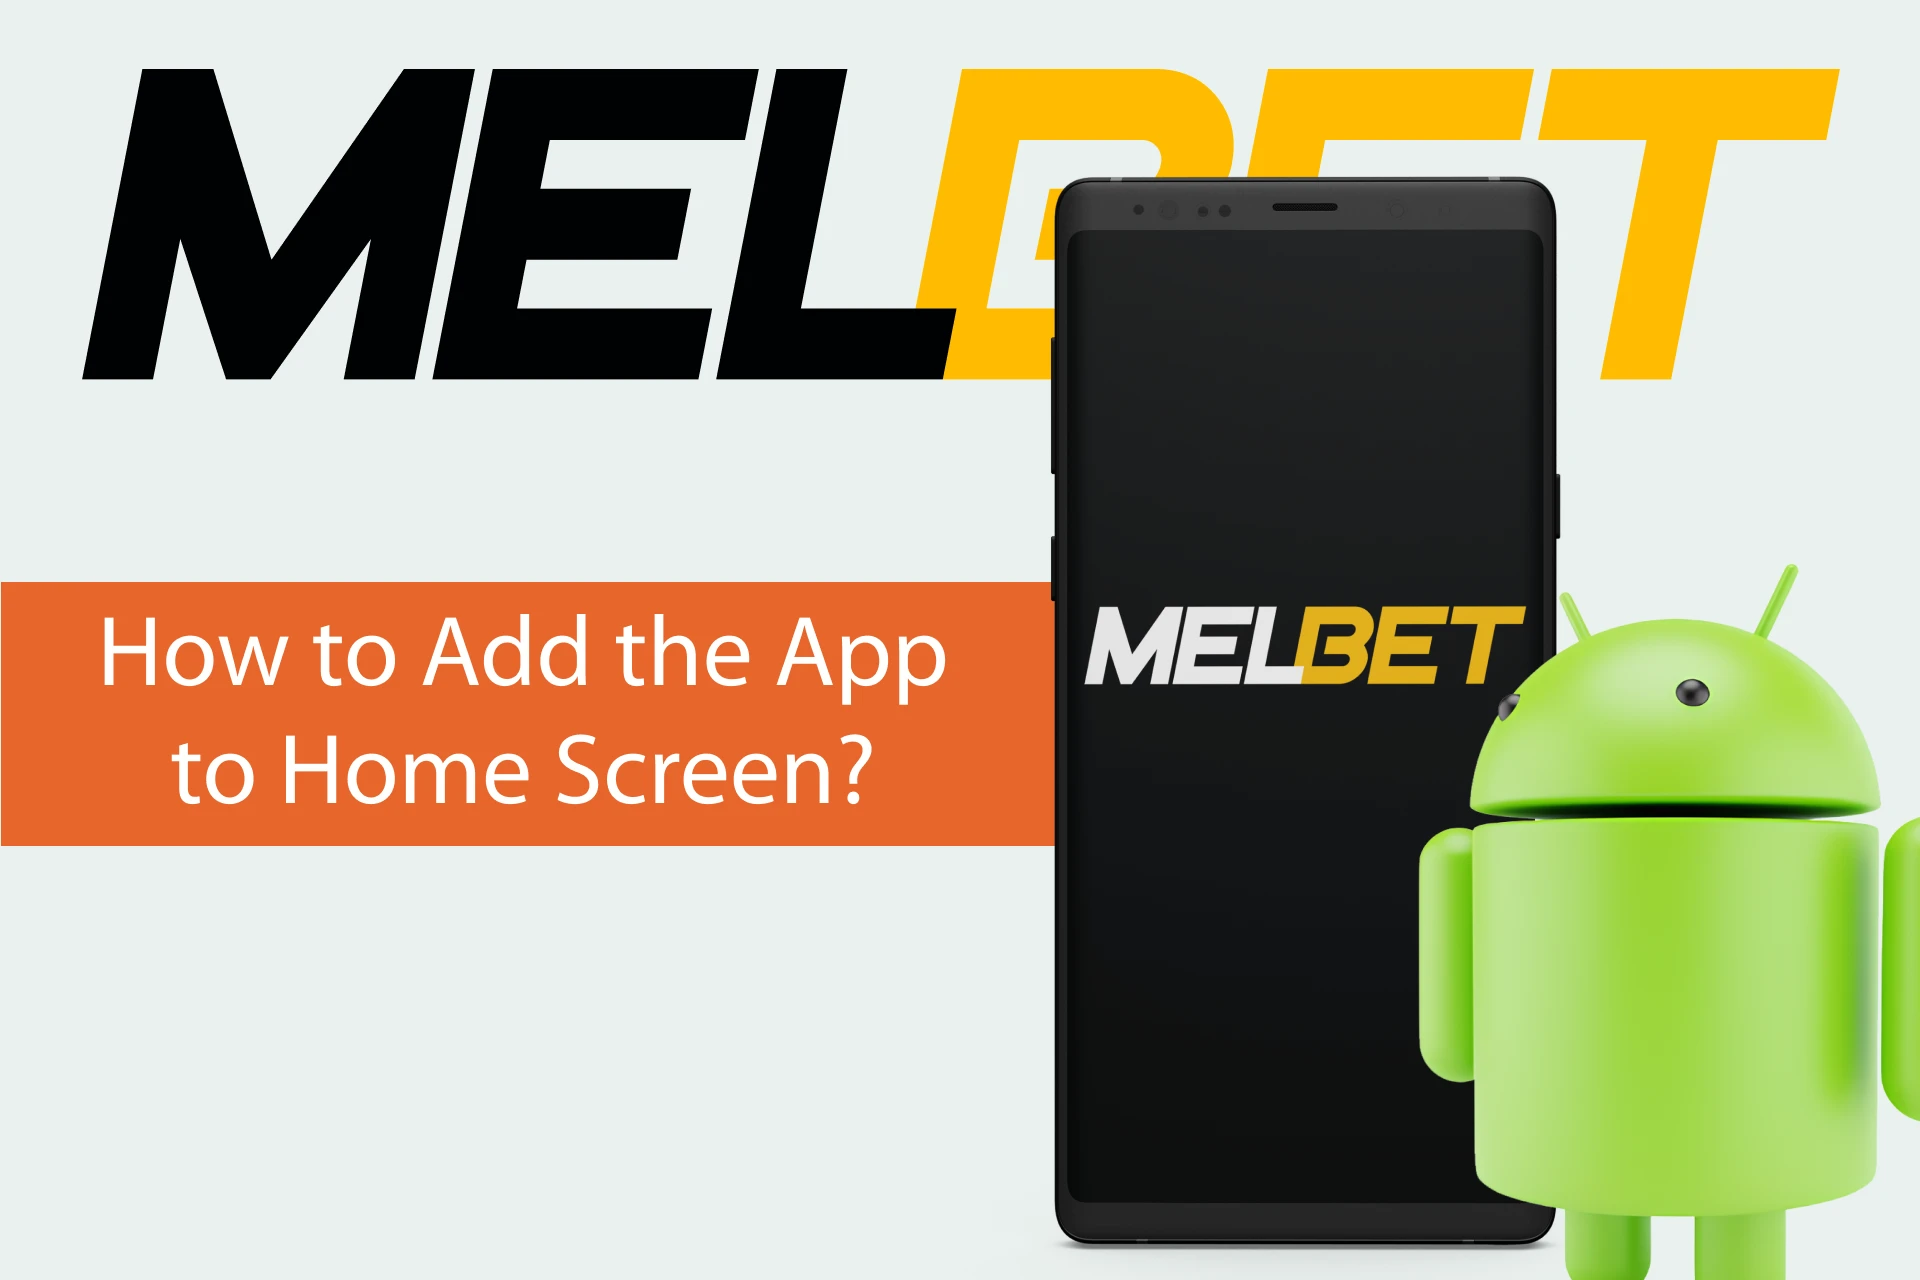 Follow these steps to add the Melbet app to your Android home screen.